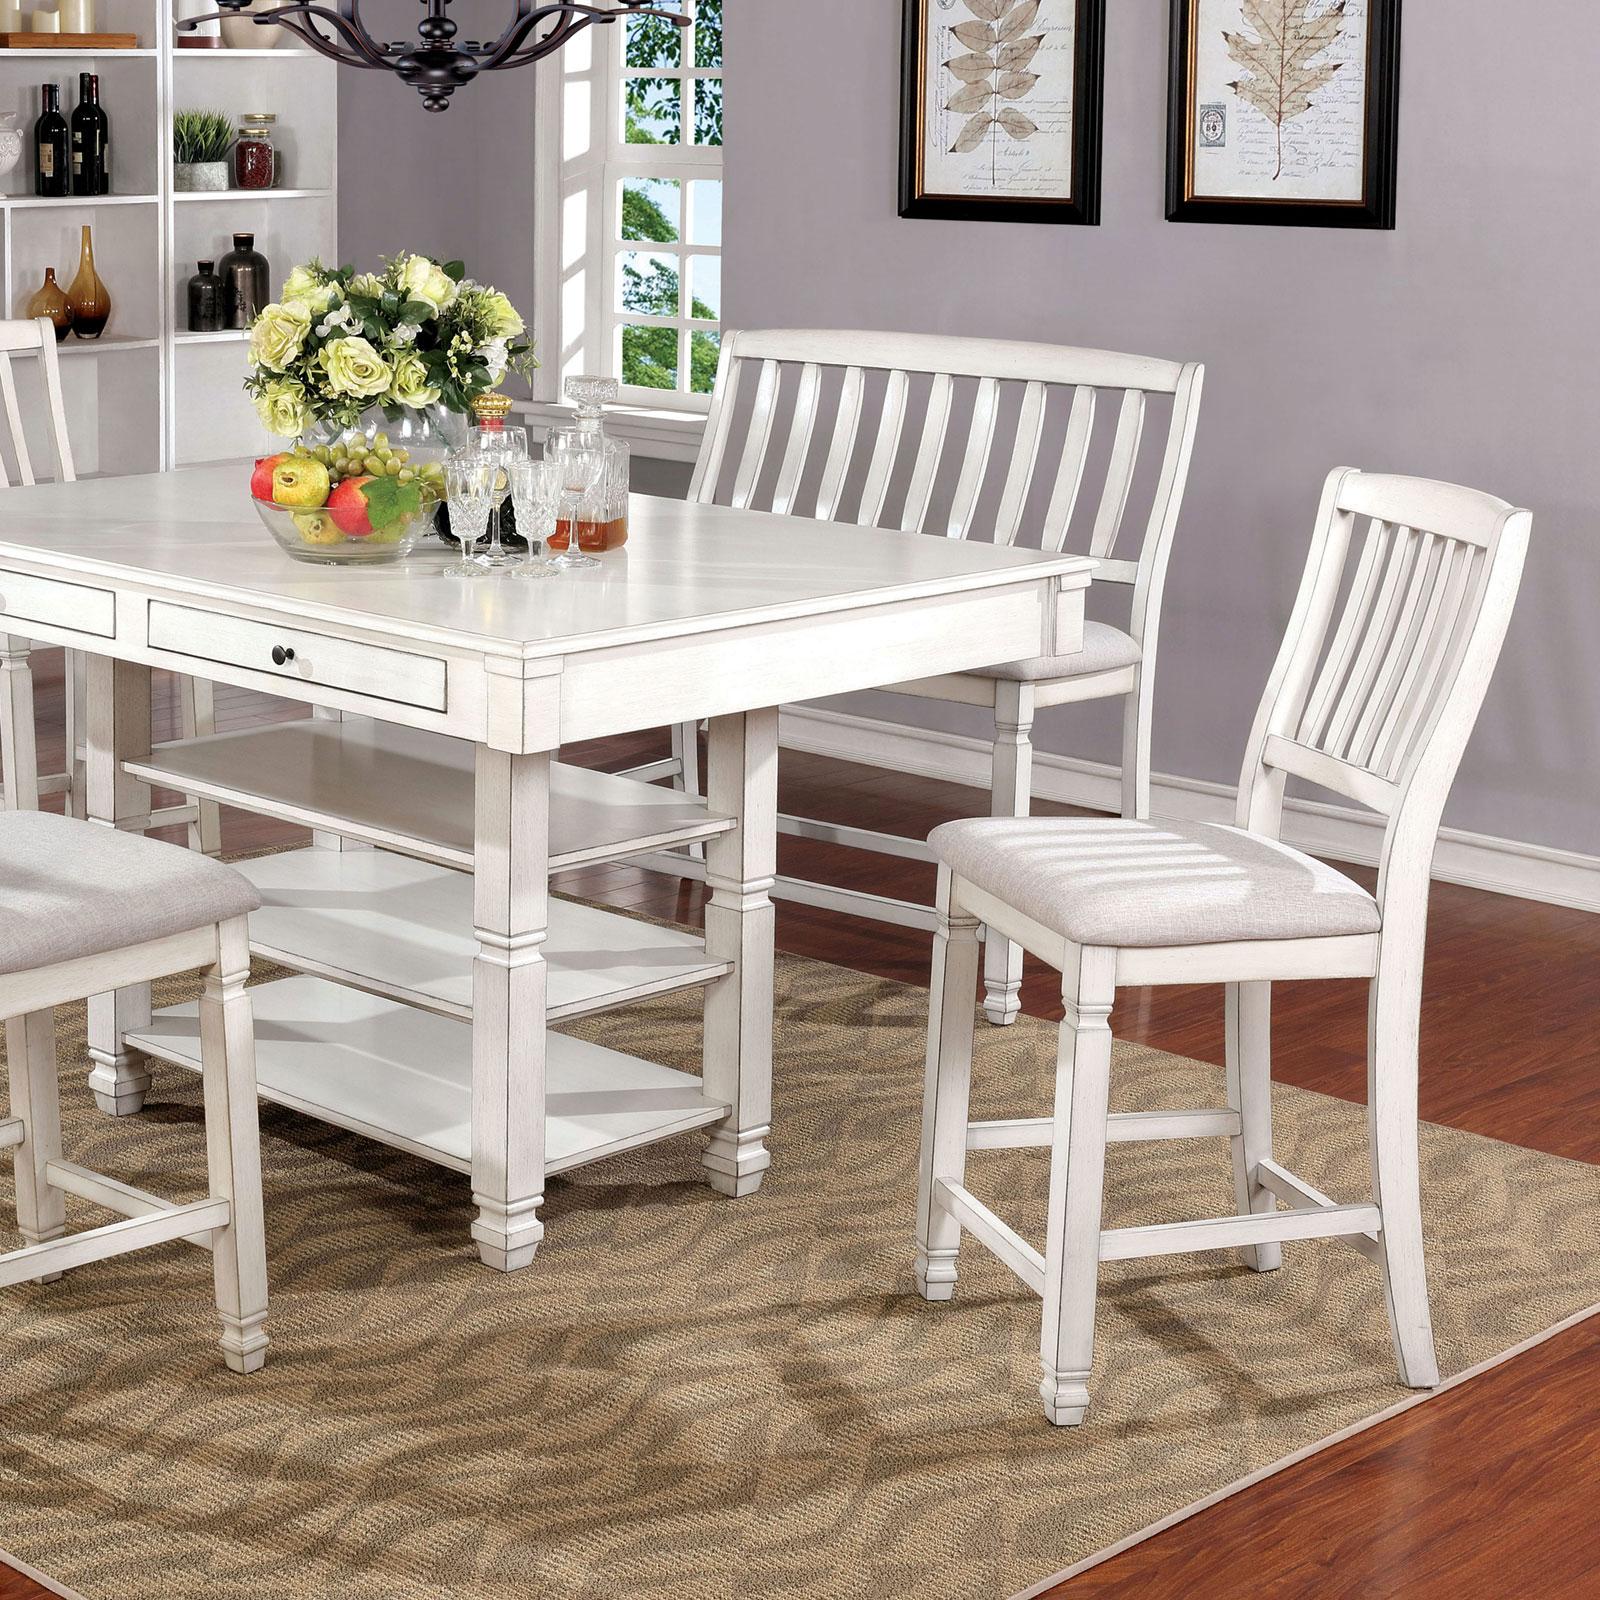 Transitional Counter Height Table KALIYAH CM3194PT CM3194PT in Antique White 